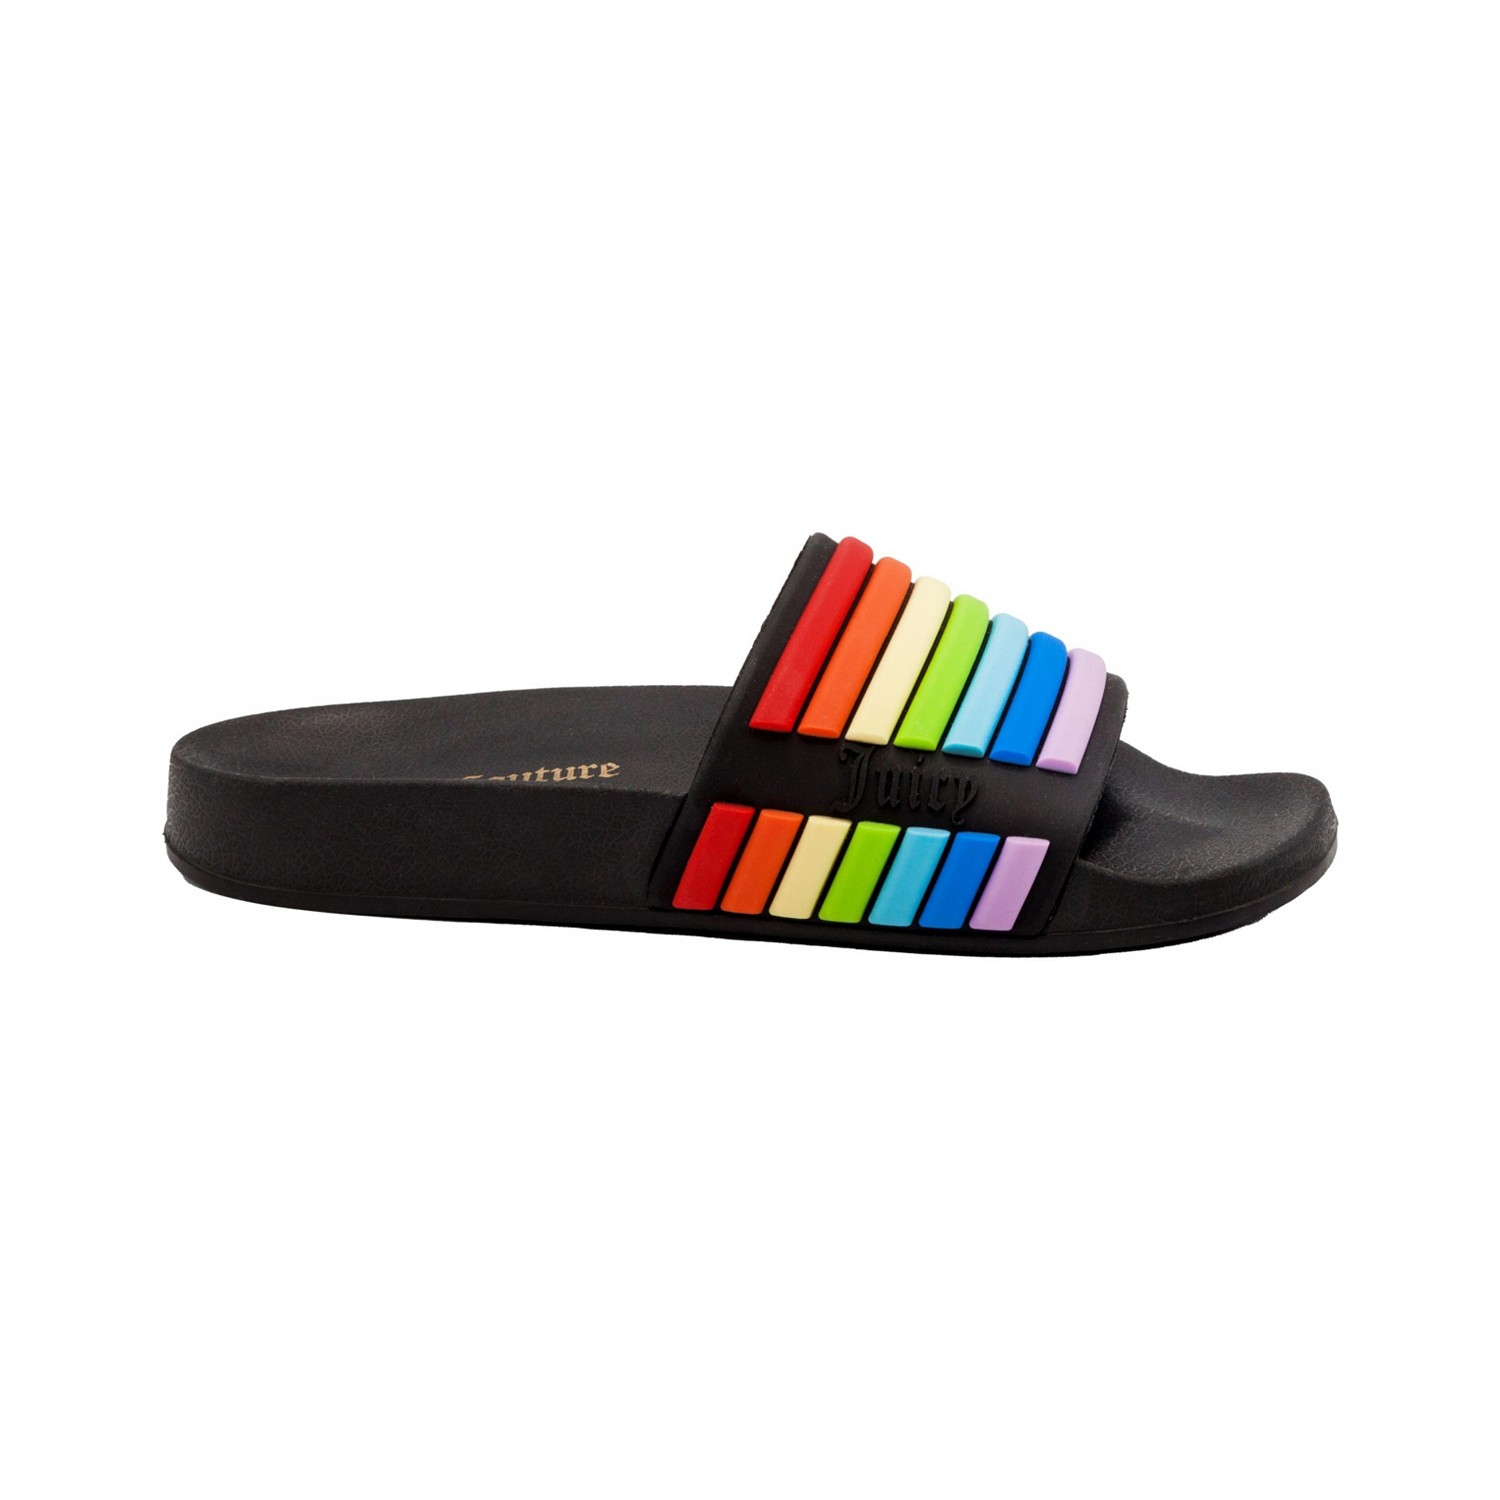 woocommerce-673321-2209615.cloudwaysapps.com-juicy-couture-womens-black-wynnie-rainbow-pool-slides